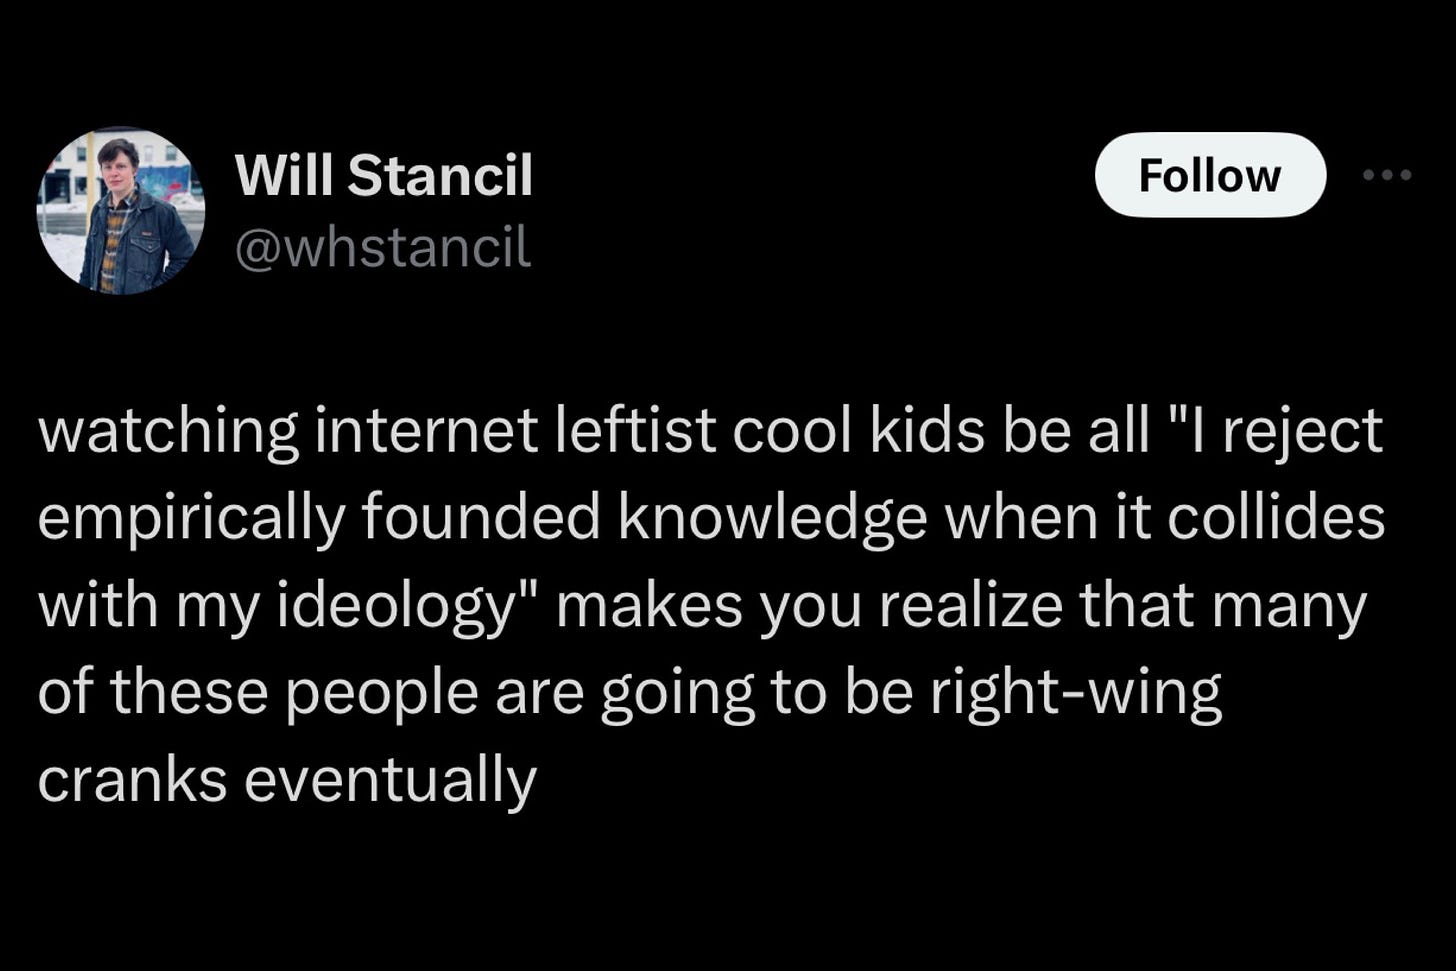 Screenshot of two follow-up tweets by William Stancil, continuing his discussion on empirical data and leftist activists. "watching internet leftist cool kids be all "I reject empirically founded knowledge when it collides with my ideology" makes you realize that many of these people are going to be right-wing cranks eventually"